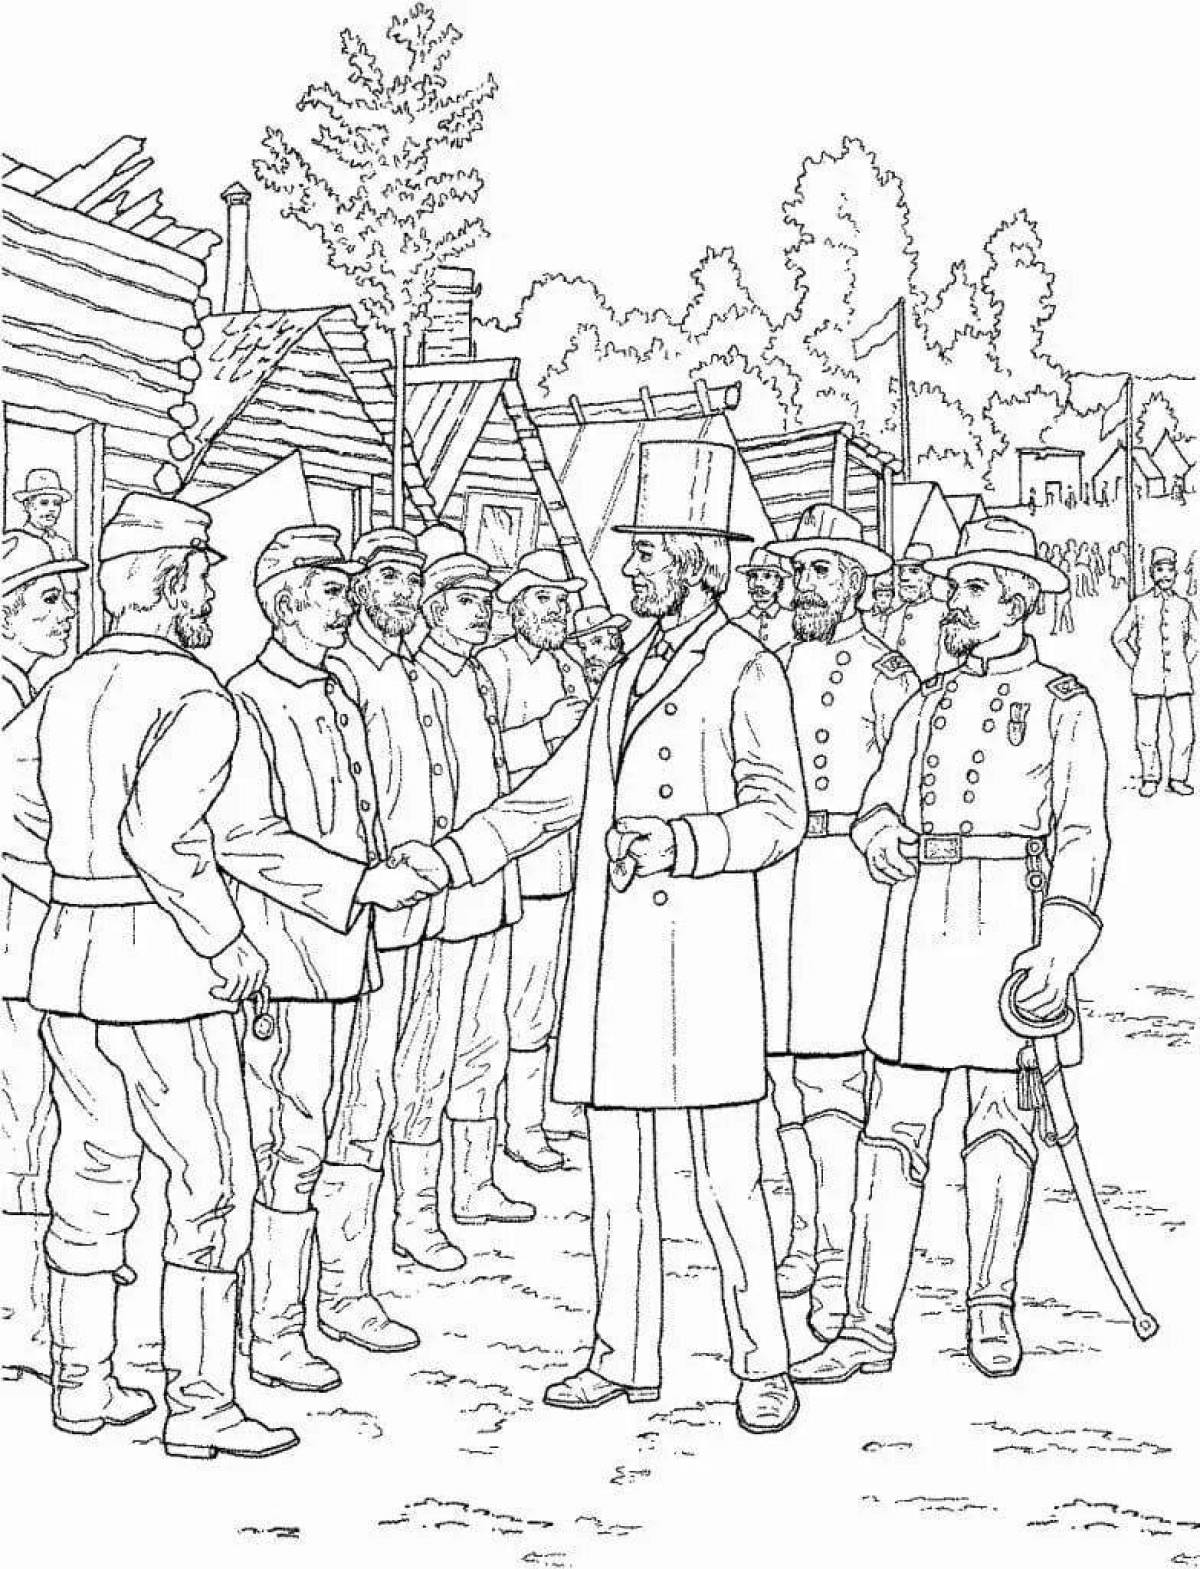 Coloring book prosperous ussr soldier